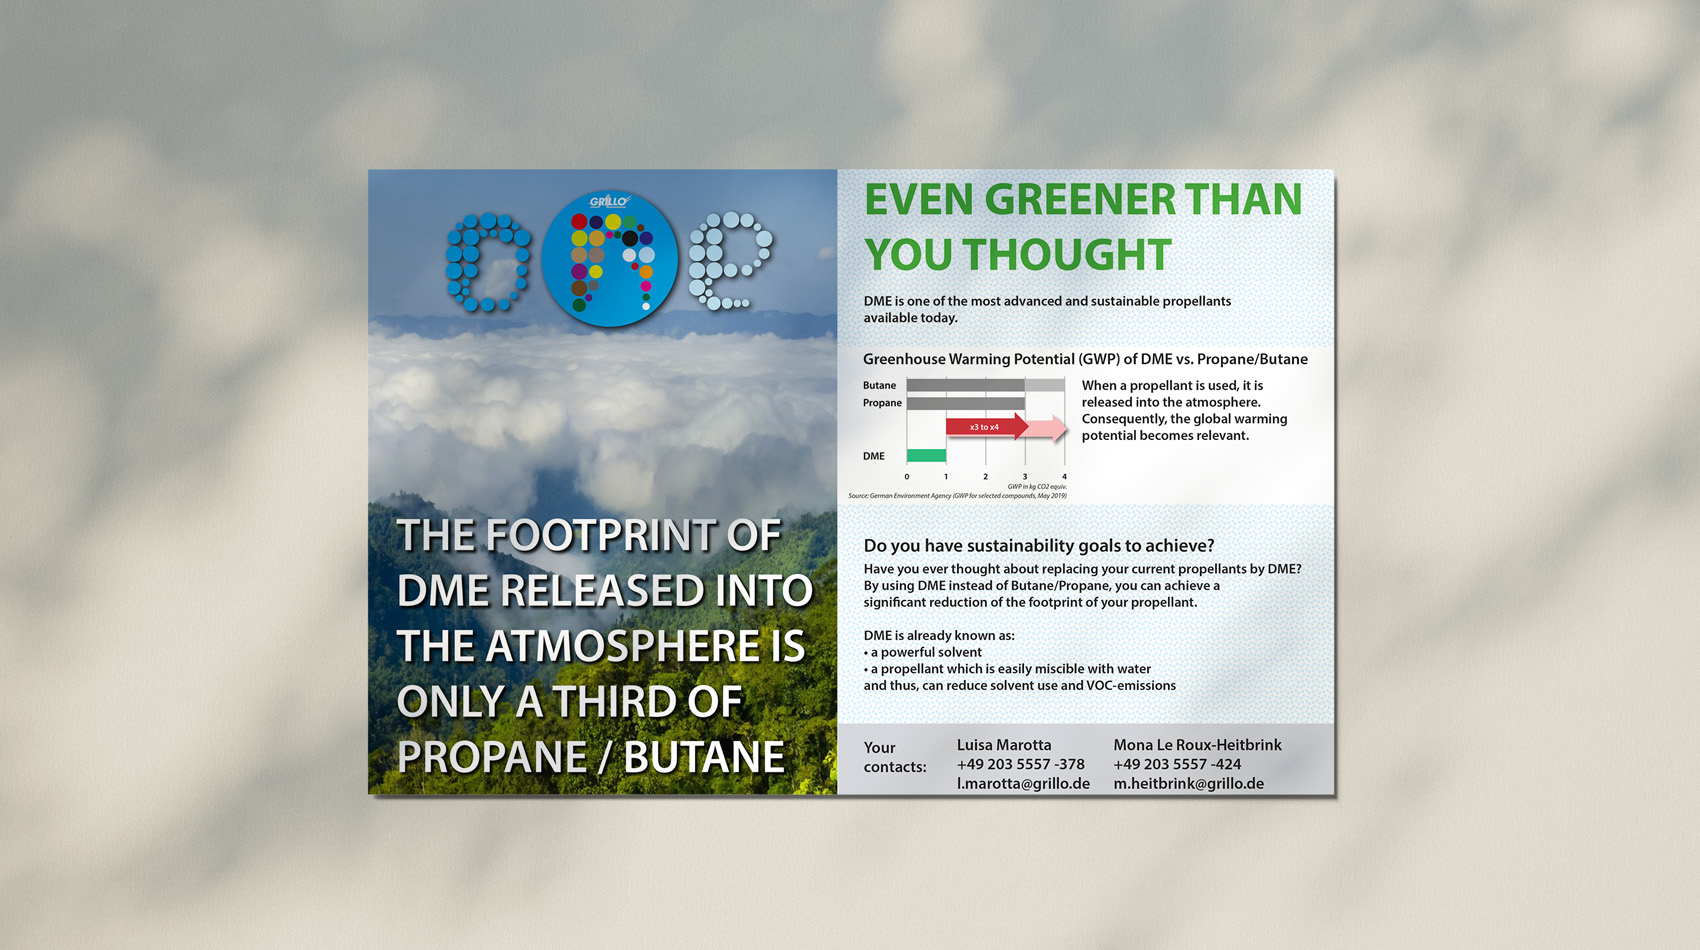 Dimethyl ether (DME) GRILLO-one is even greener than thought!